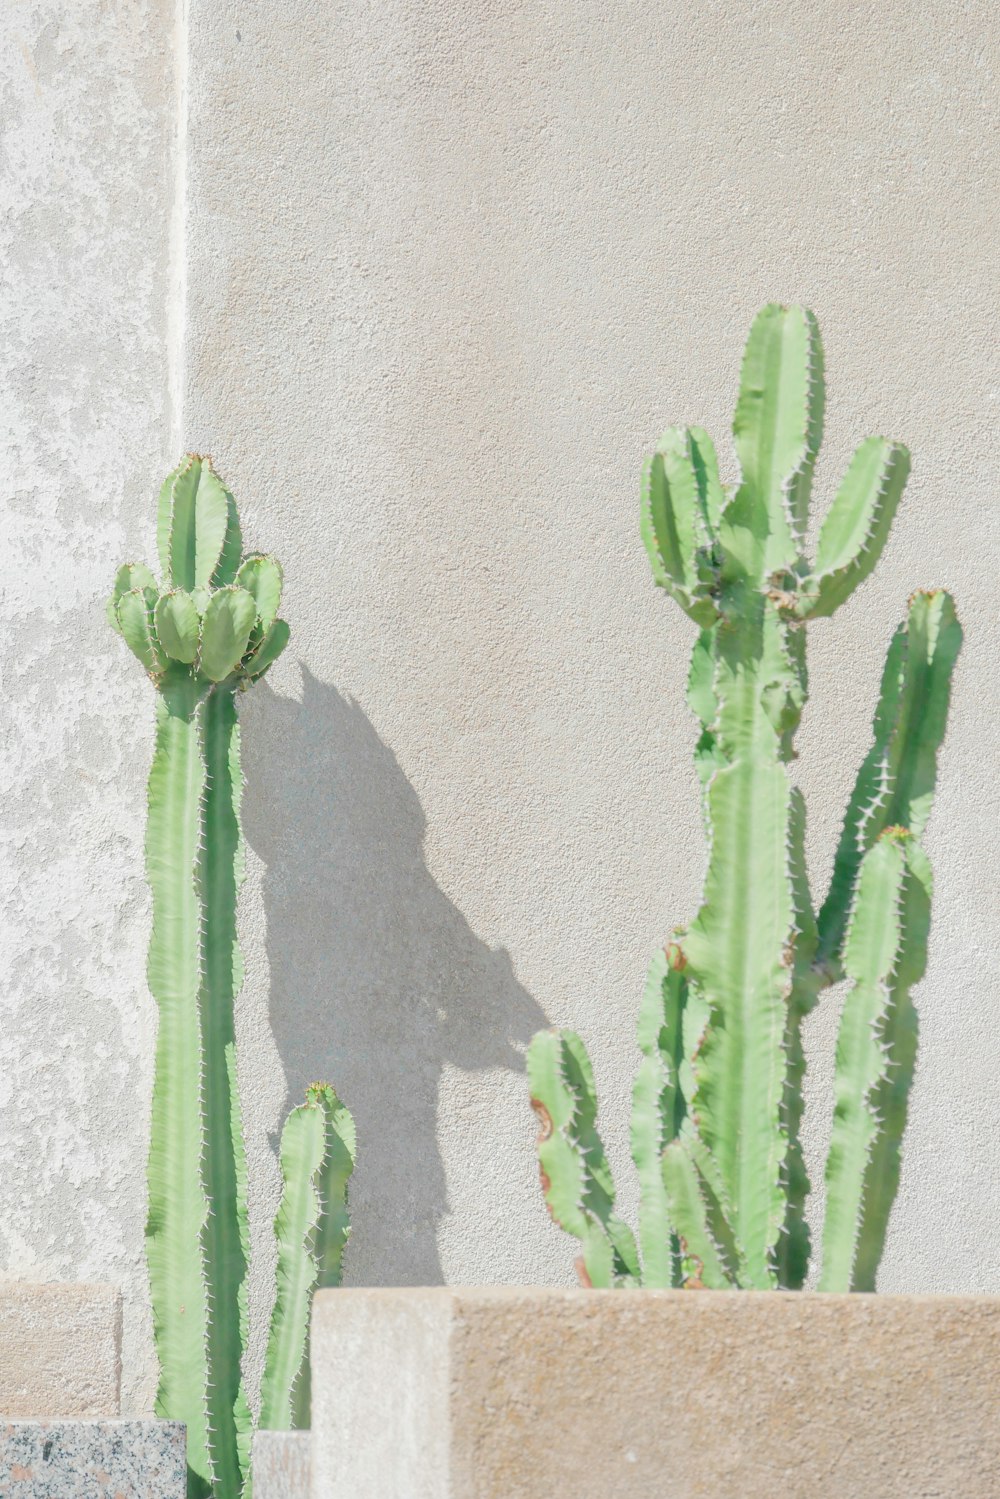 a couple of green cactus plants next to a cement wall